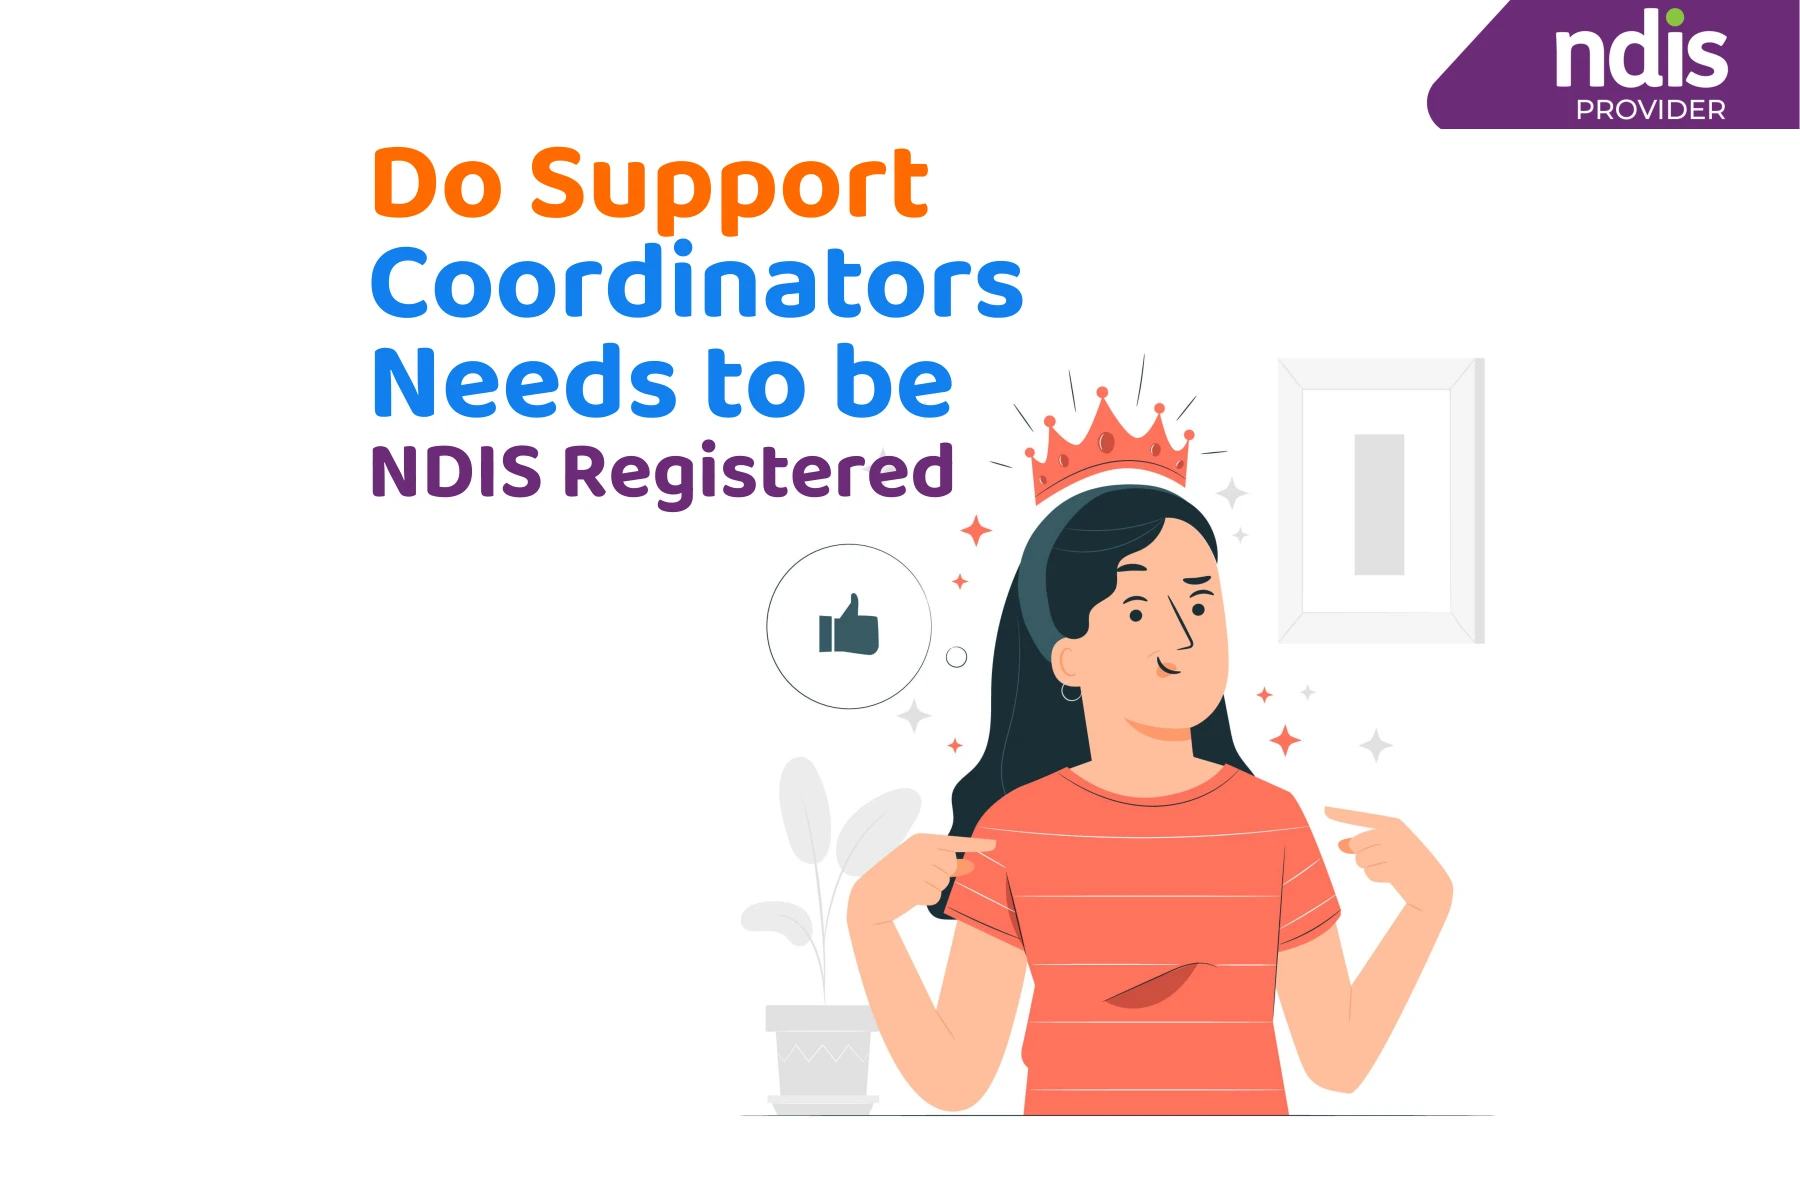 Do support coordinators needs to be NDIS registered